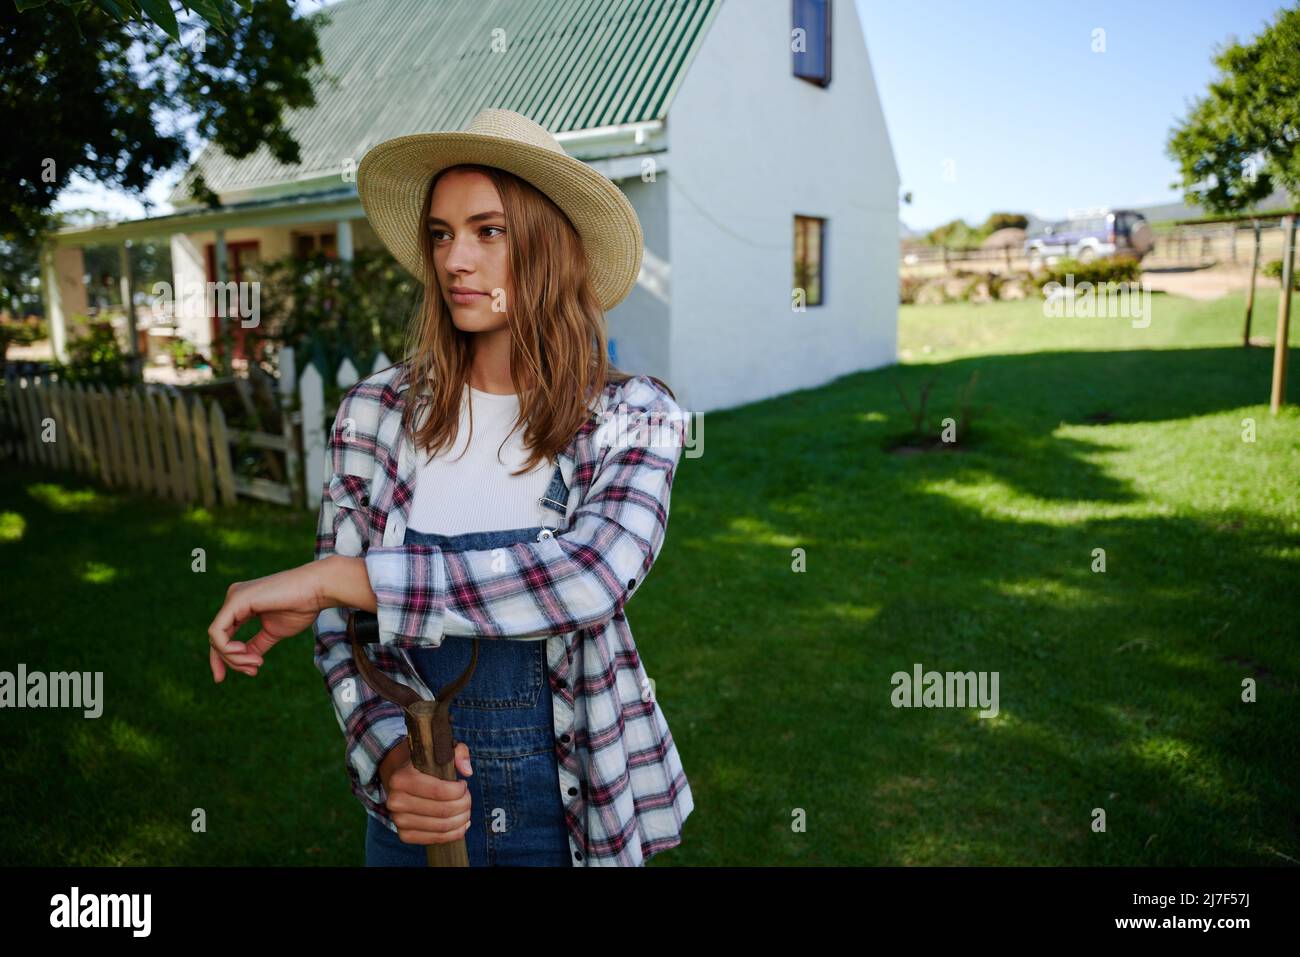 Caucasian female farmer standing outdoors leaning on pitch fork  Stock Photo